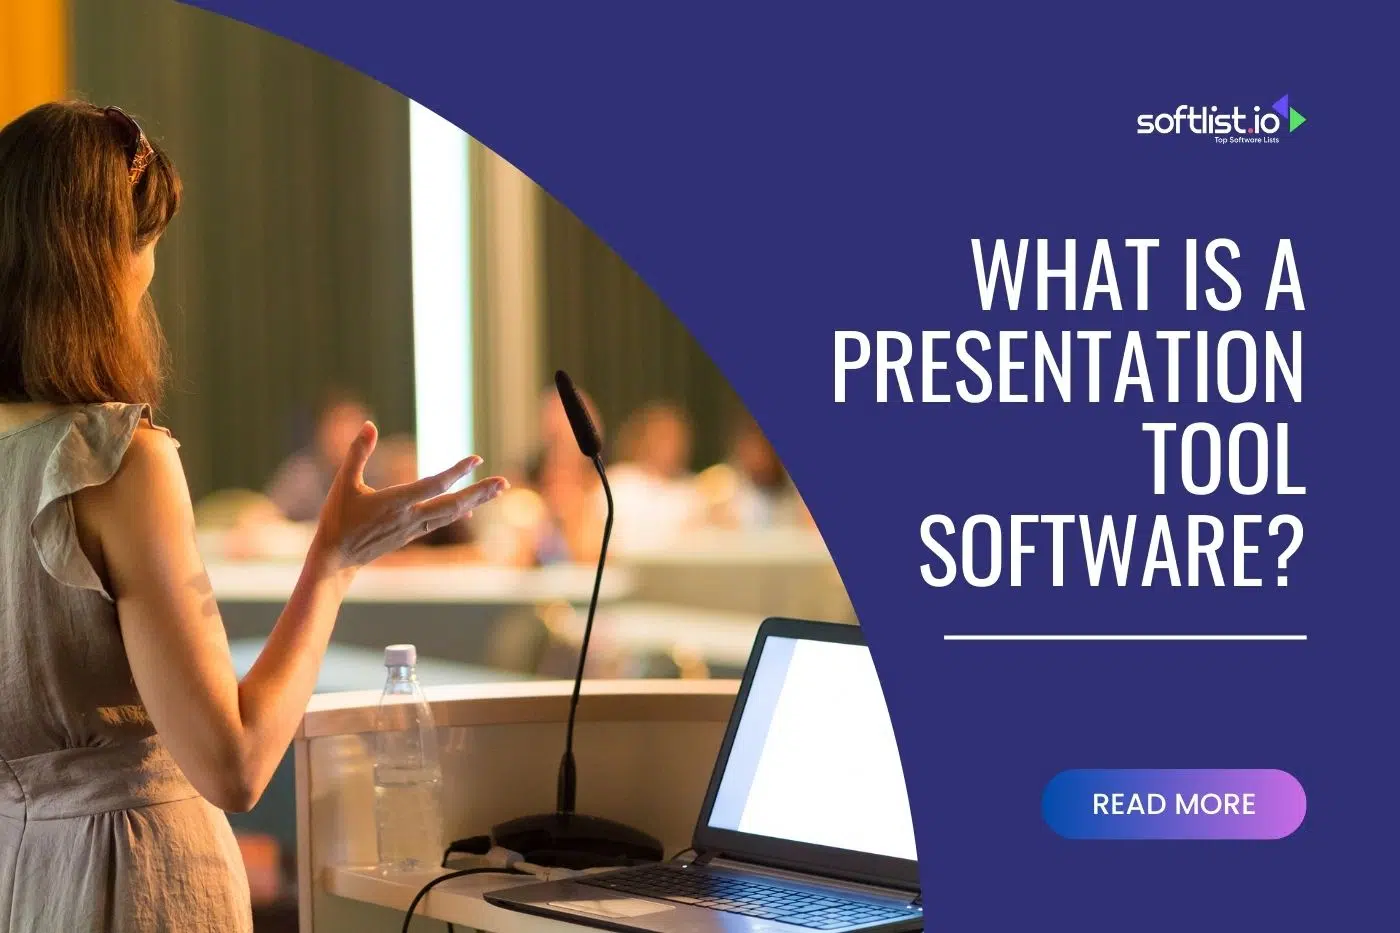 What Is a Presentation Tool Software